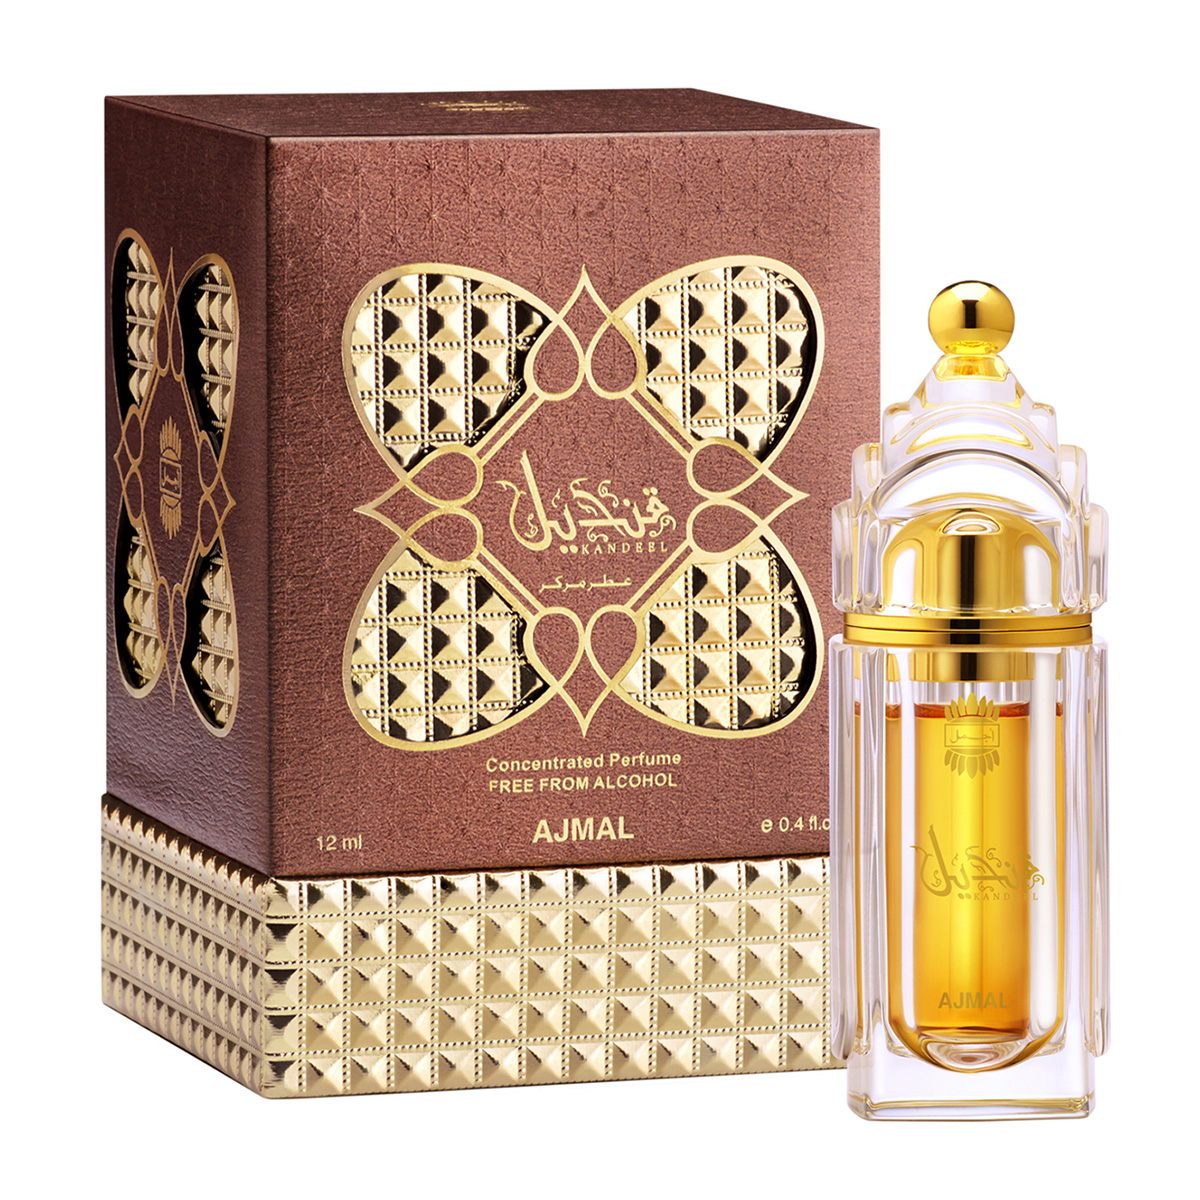 Ajmal Kandeel Concentrated Perfume Free From Alcohol, 12ml